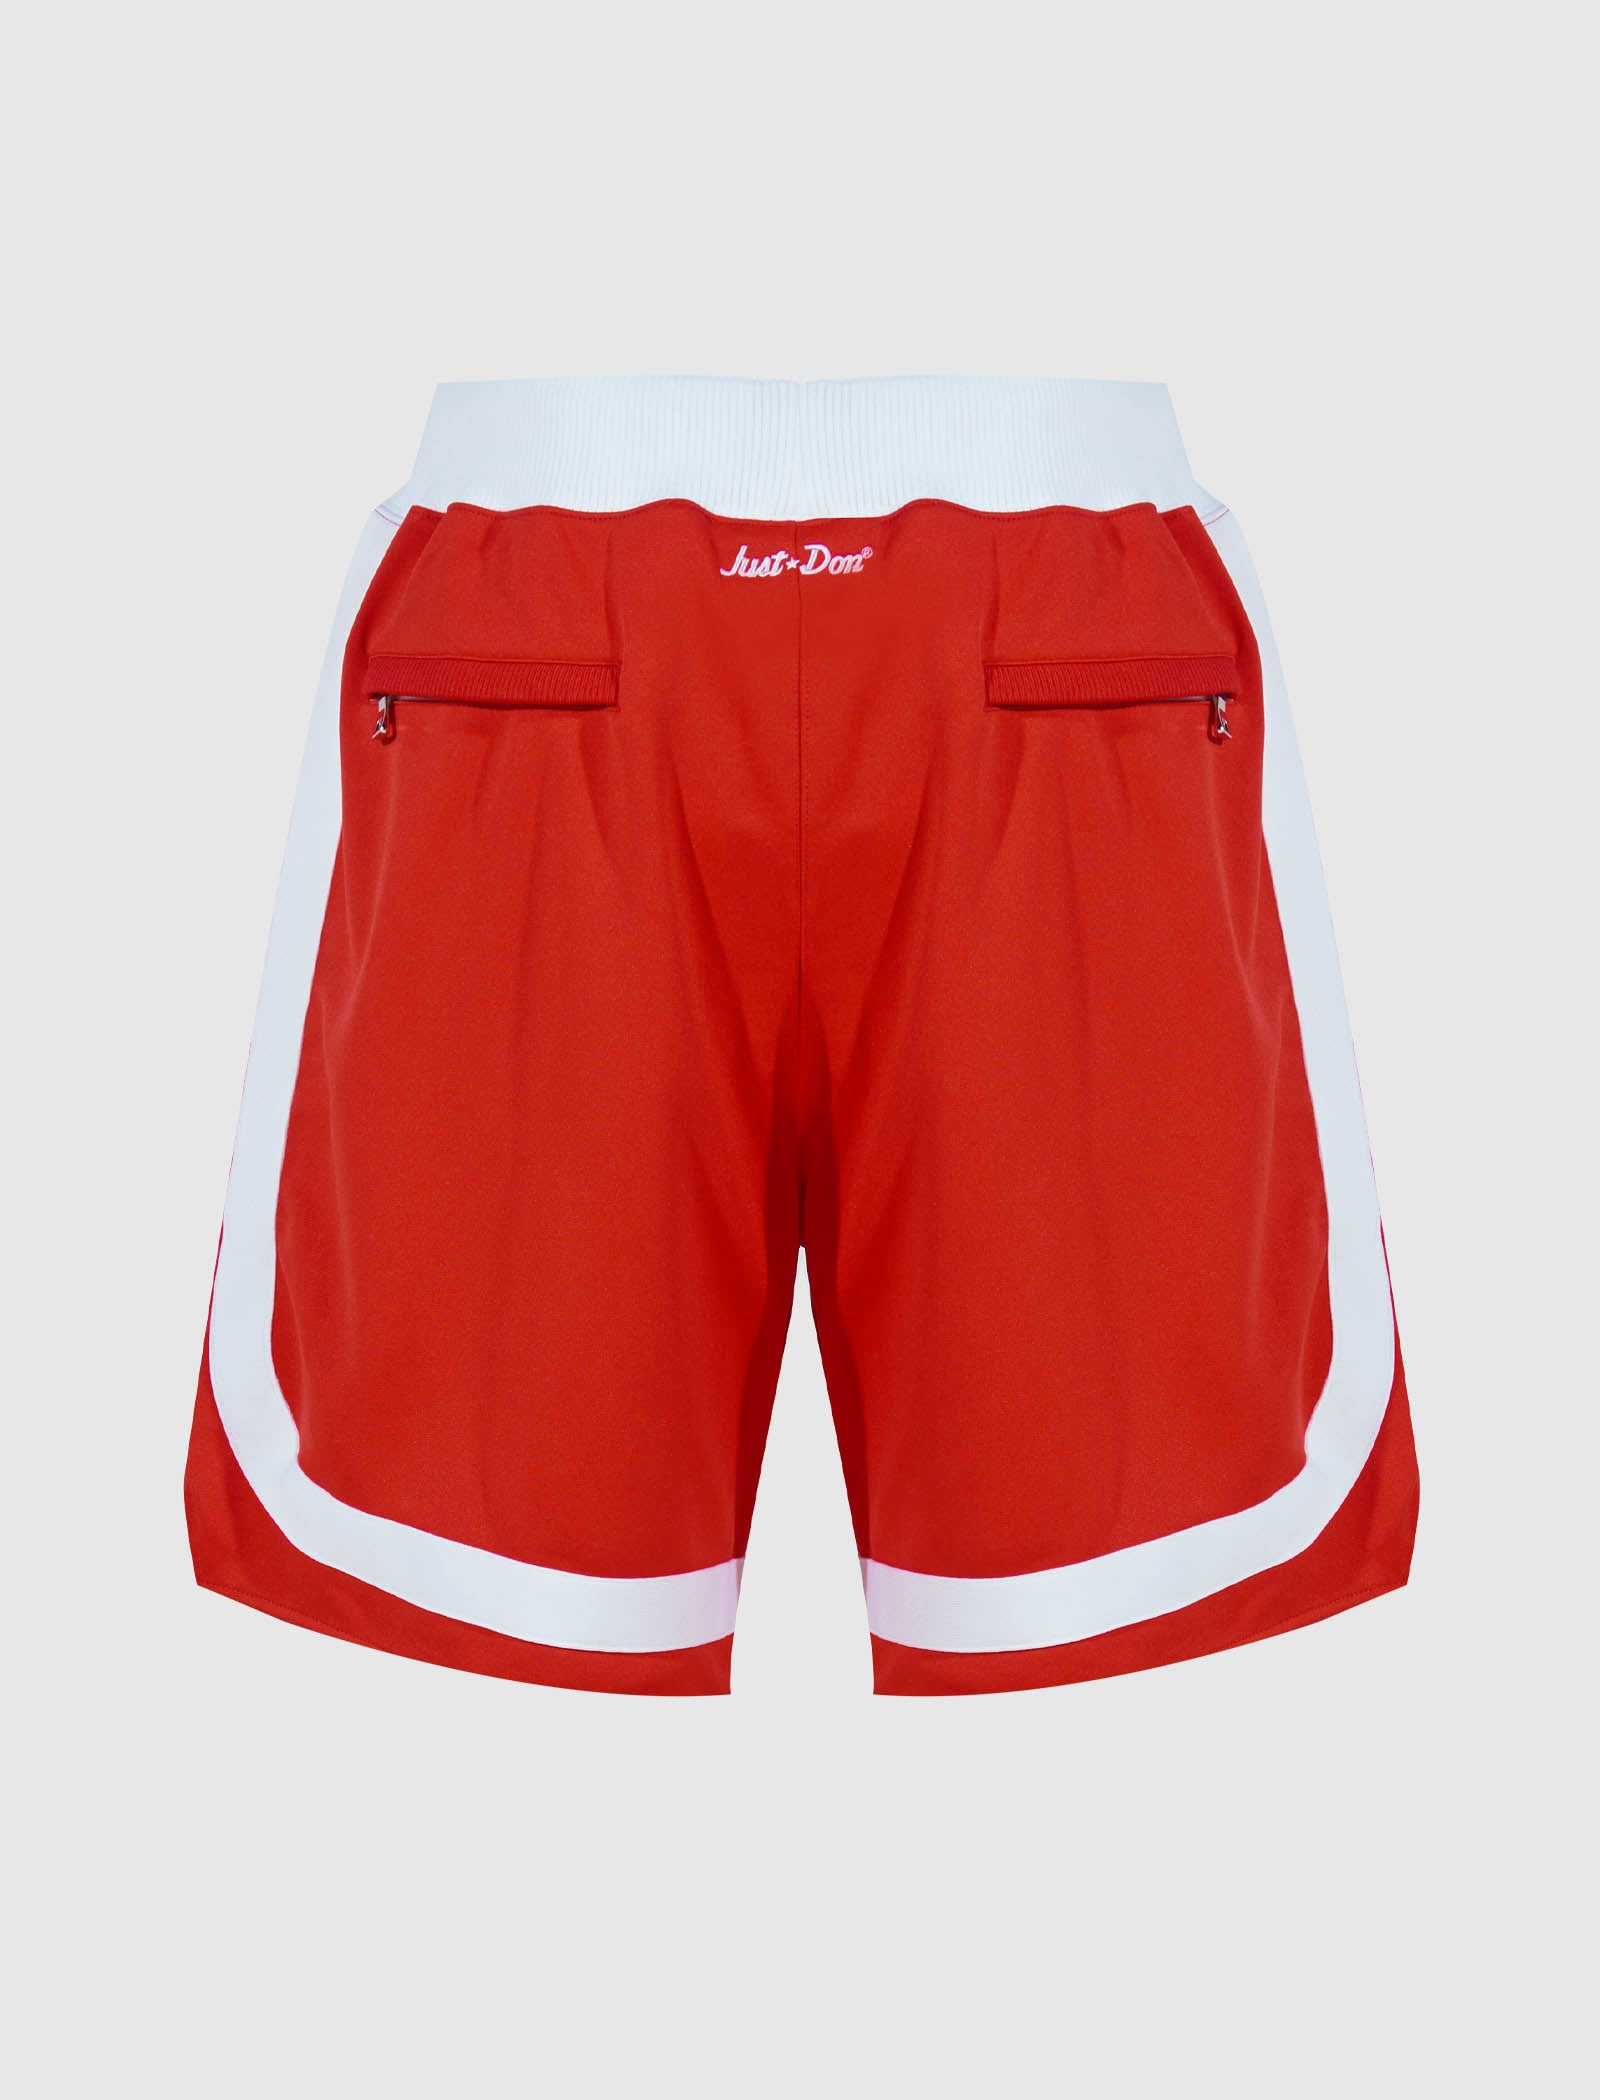 MITCHELL & NESS JUST DON ABA SOUNDS SHORTS